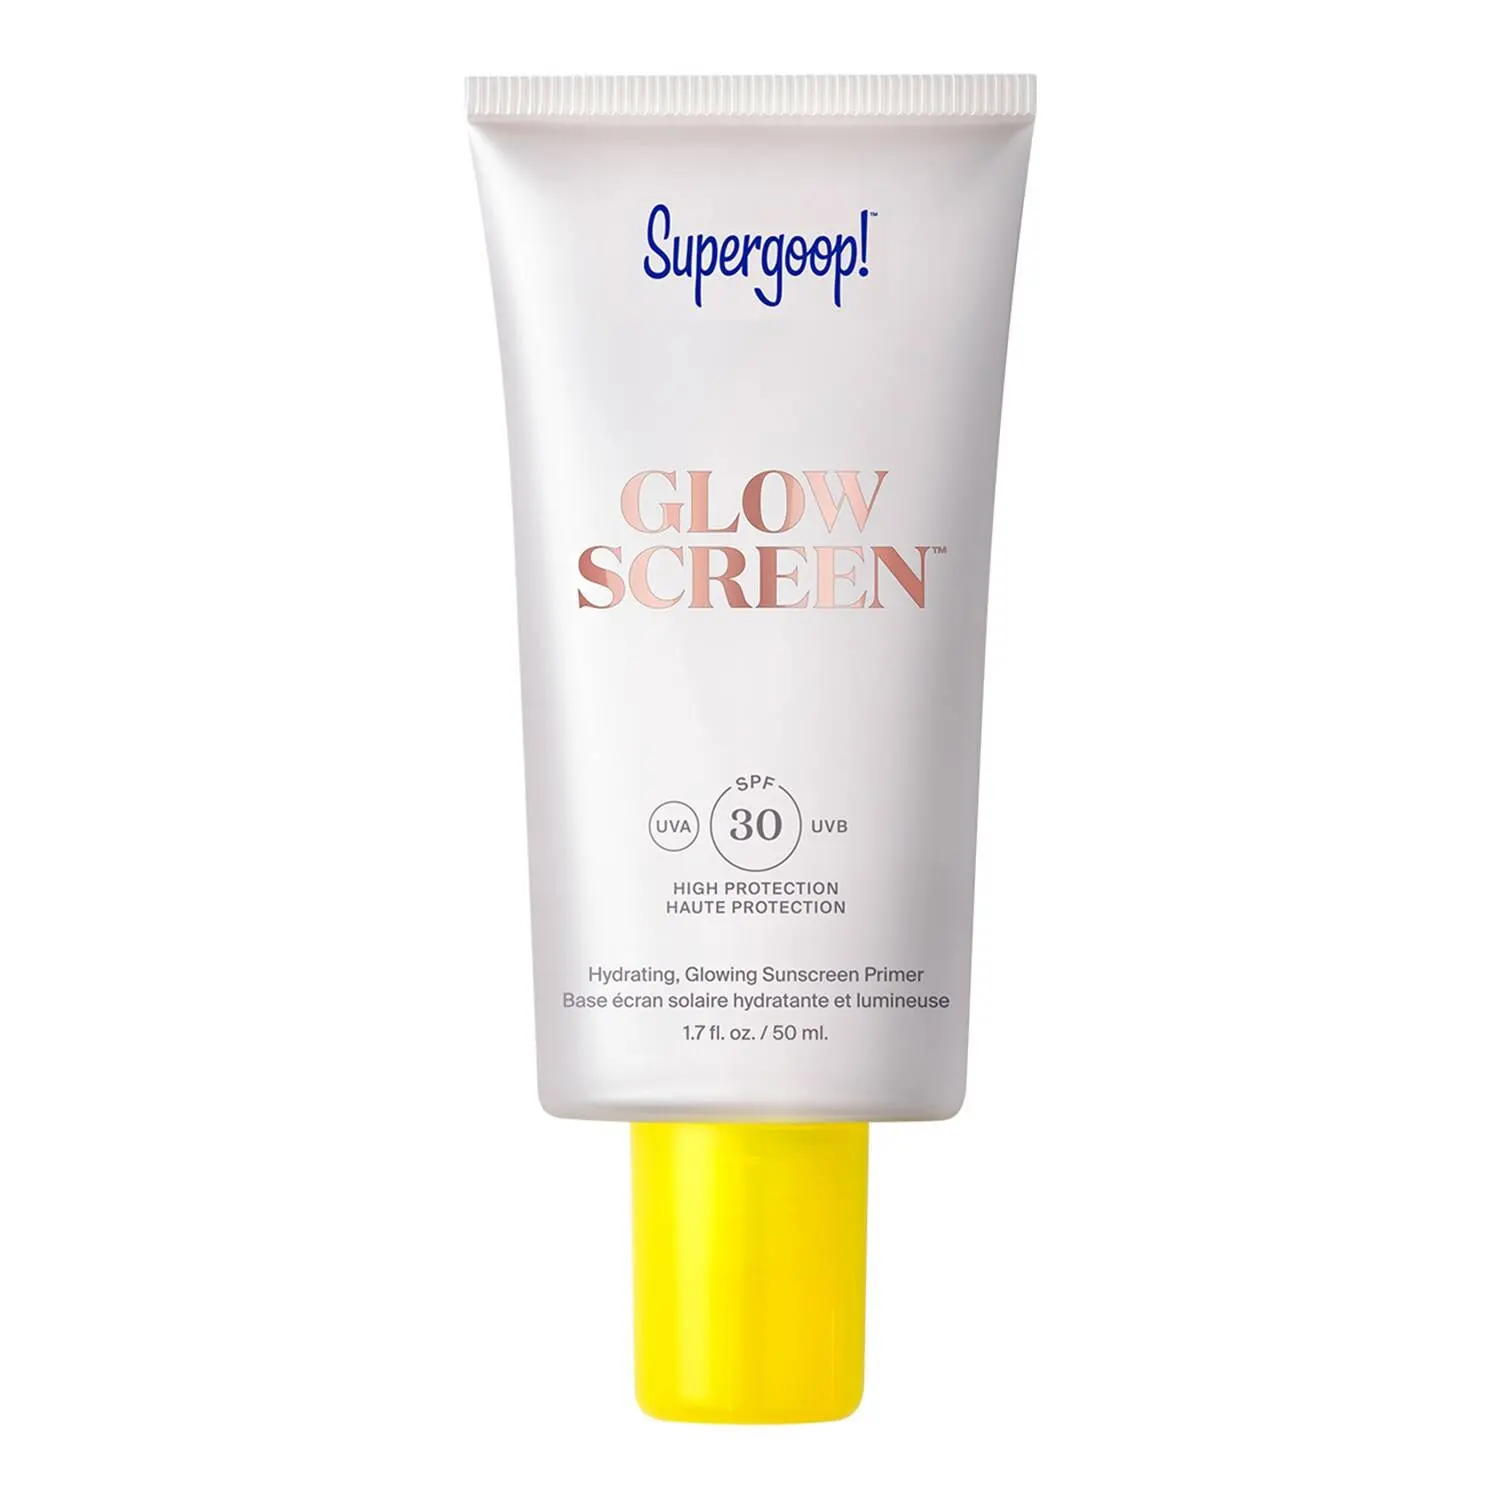 SUPERGOOP! Glowscreen - Sunscreen SPF 30 PA+++ with Hyaluronic Acid + Niacinamide Discounts and Cashback